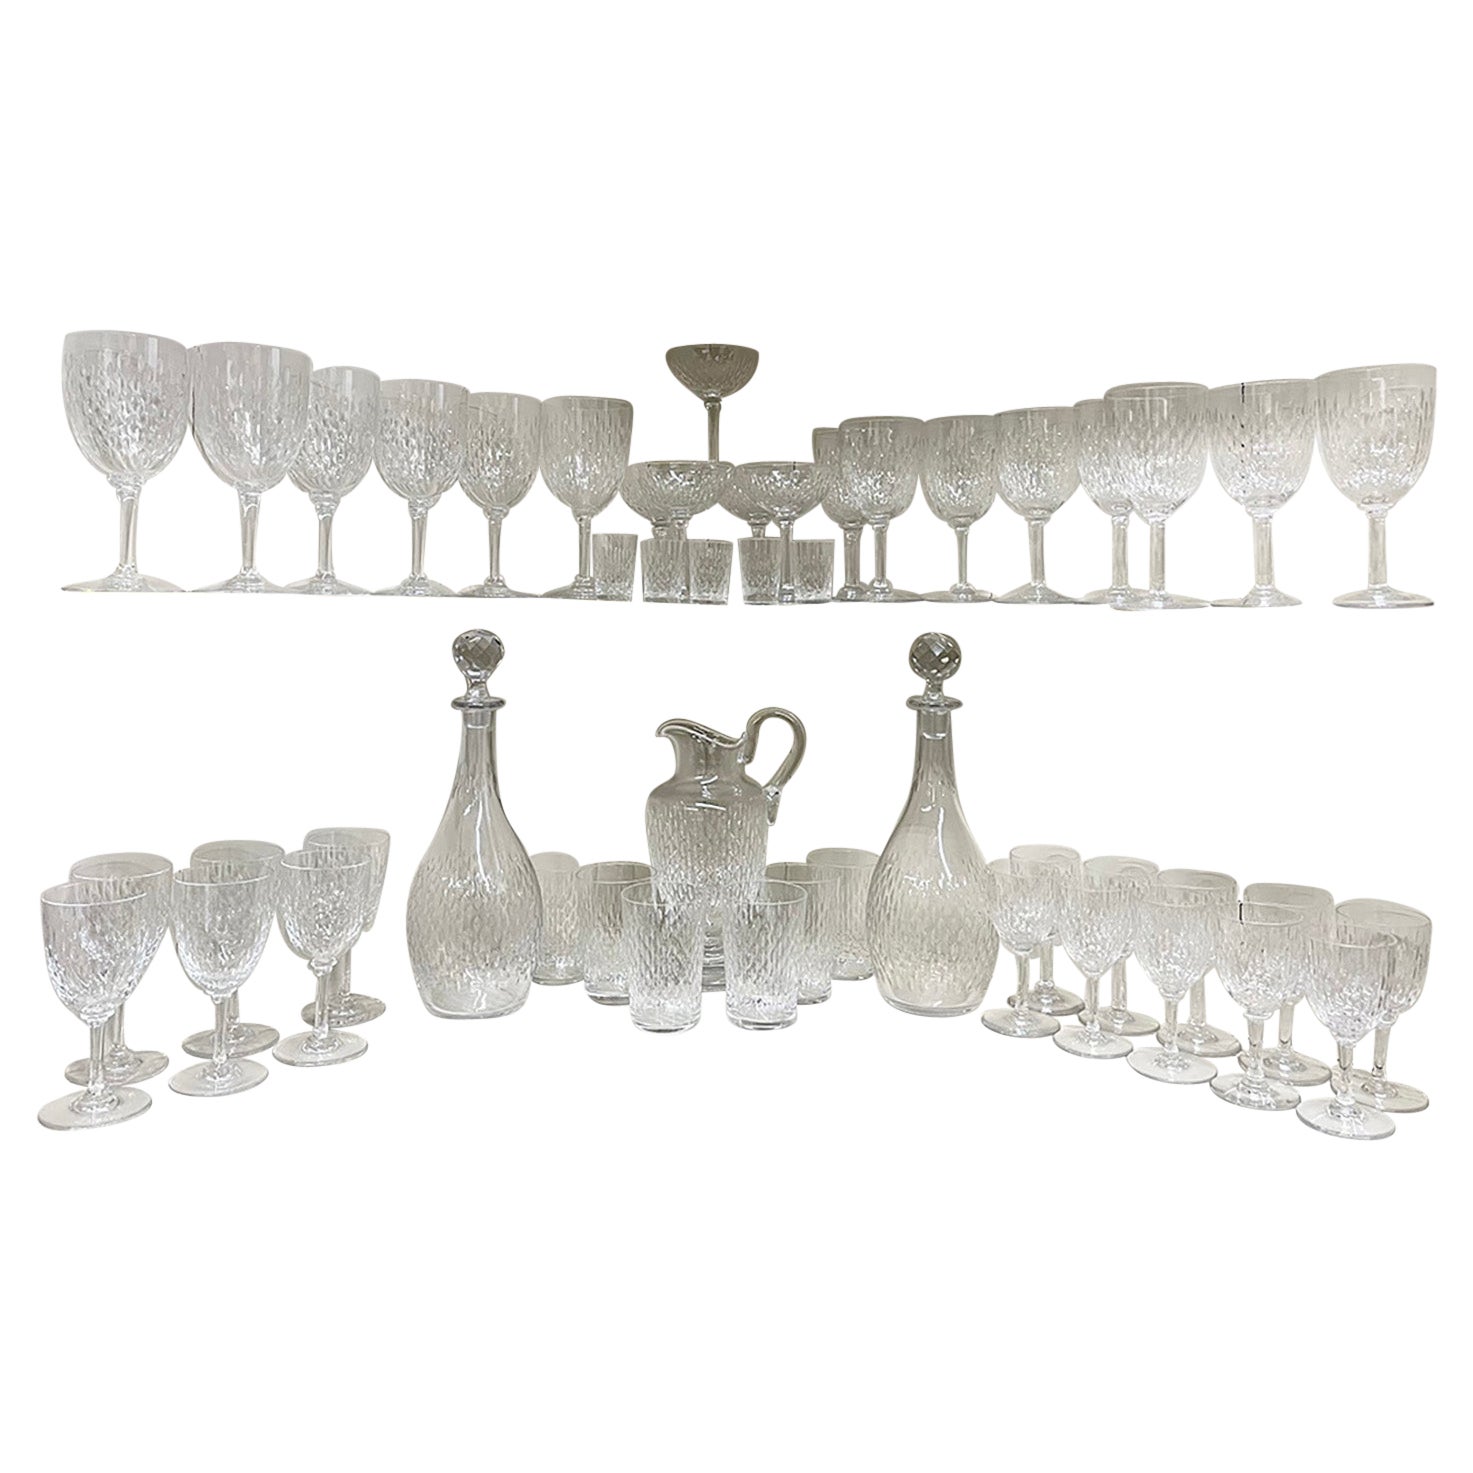 49 pieces Crystal set by Baccarat, France